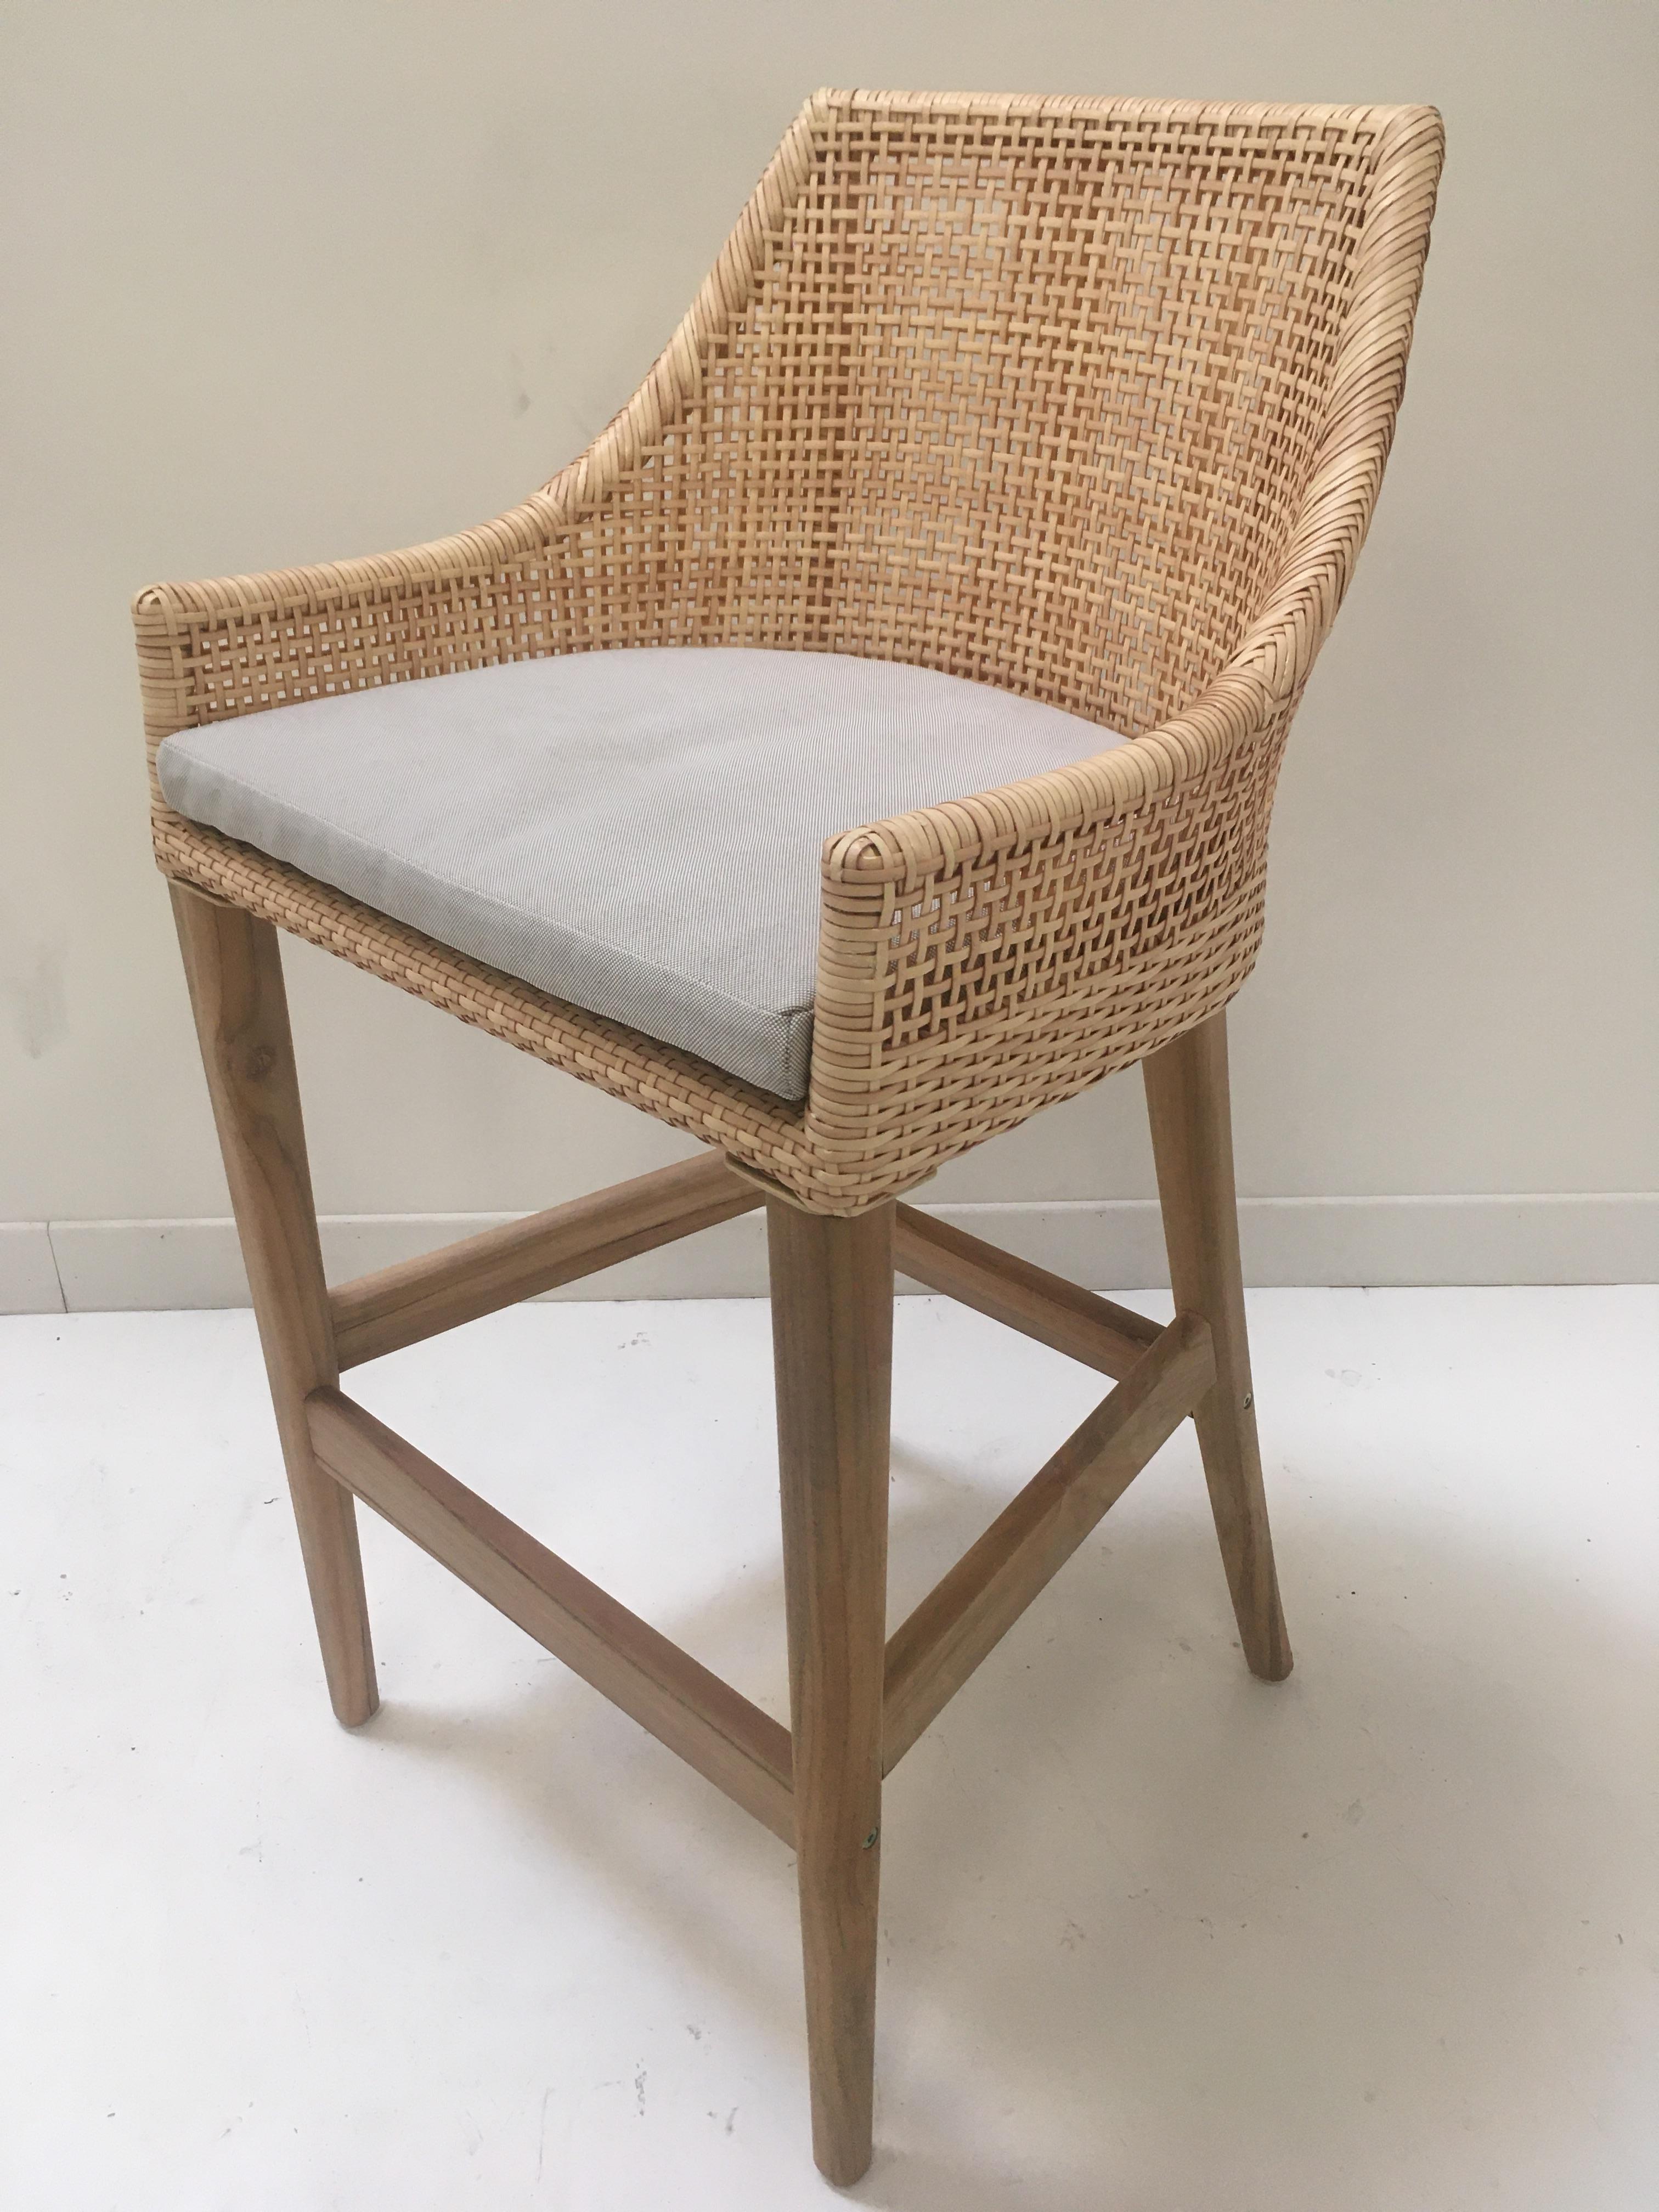 French Teak Wooden and Braided Resin Rattan Effect Outdoor Bar Stool For Sale